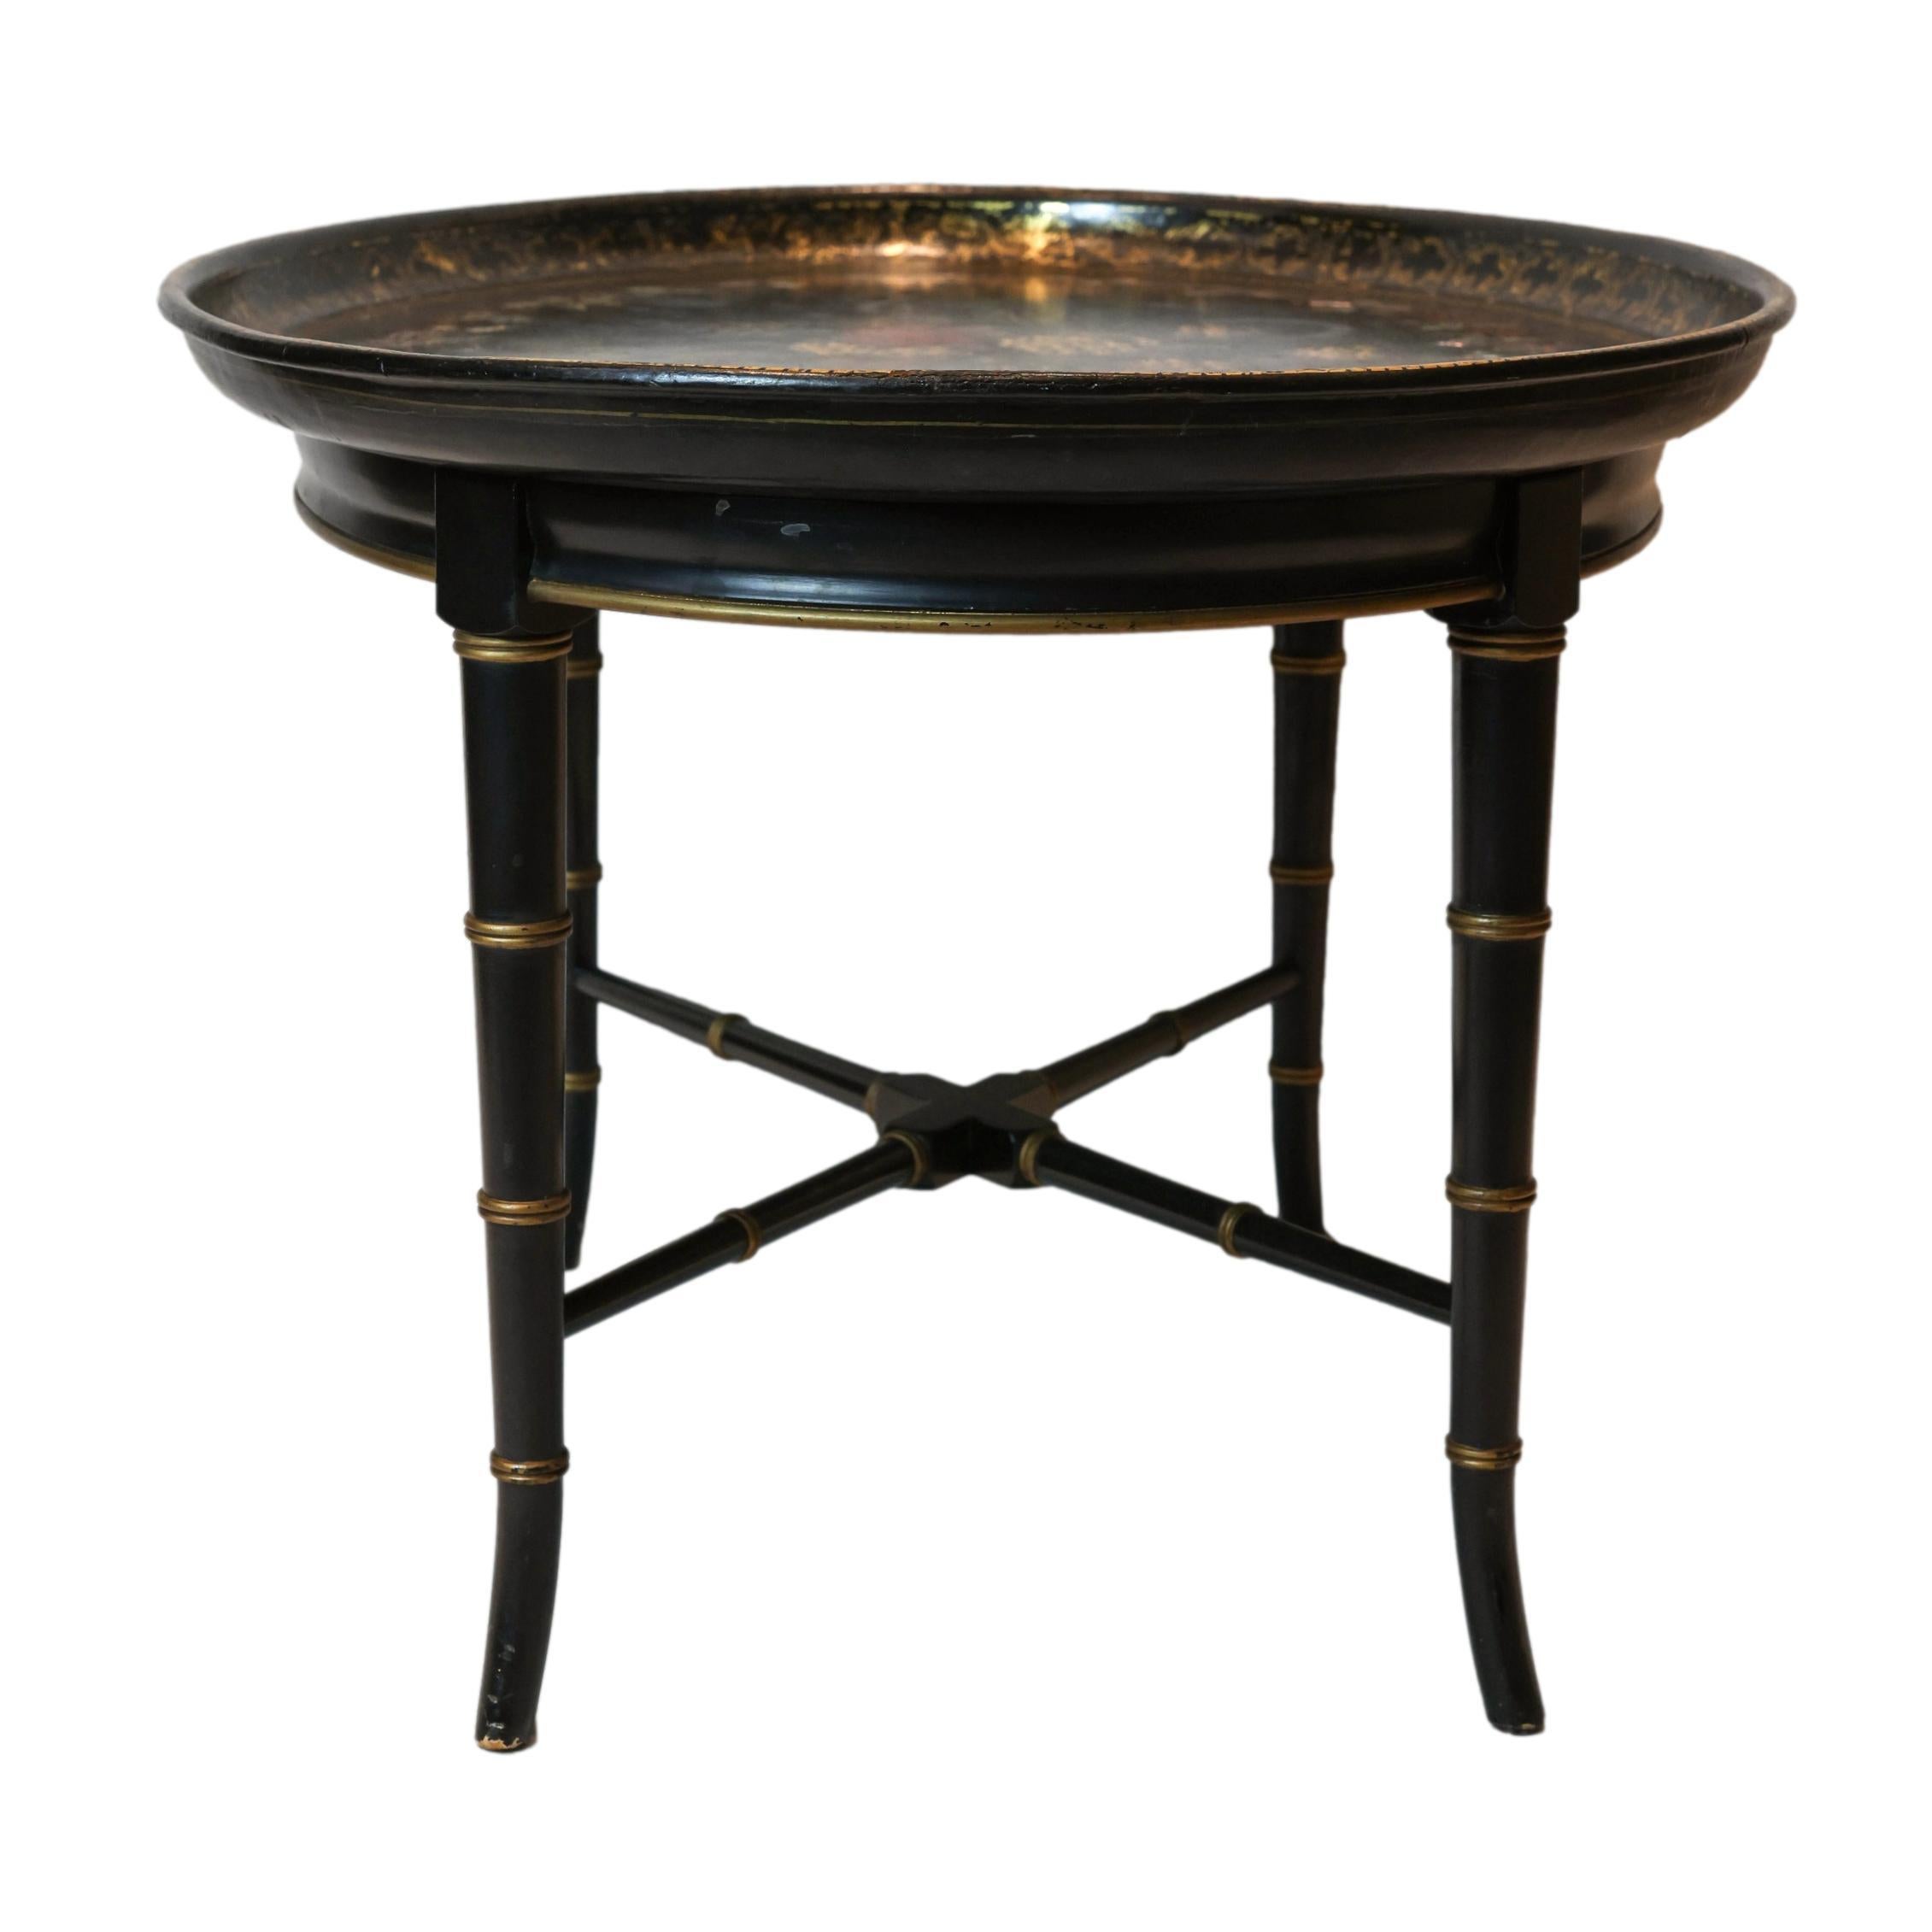 Inlay Mother-of-Pearl Inlaid and Ebonized Paper Mache Tray Table, English, ca. 1850 For Sale